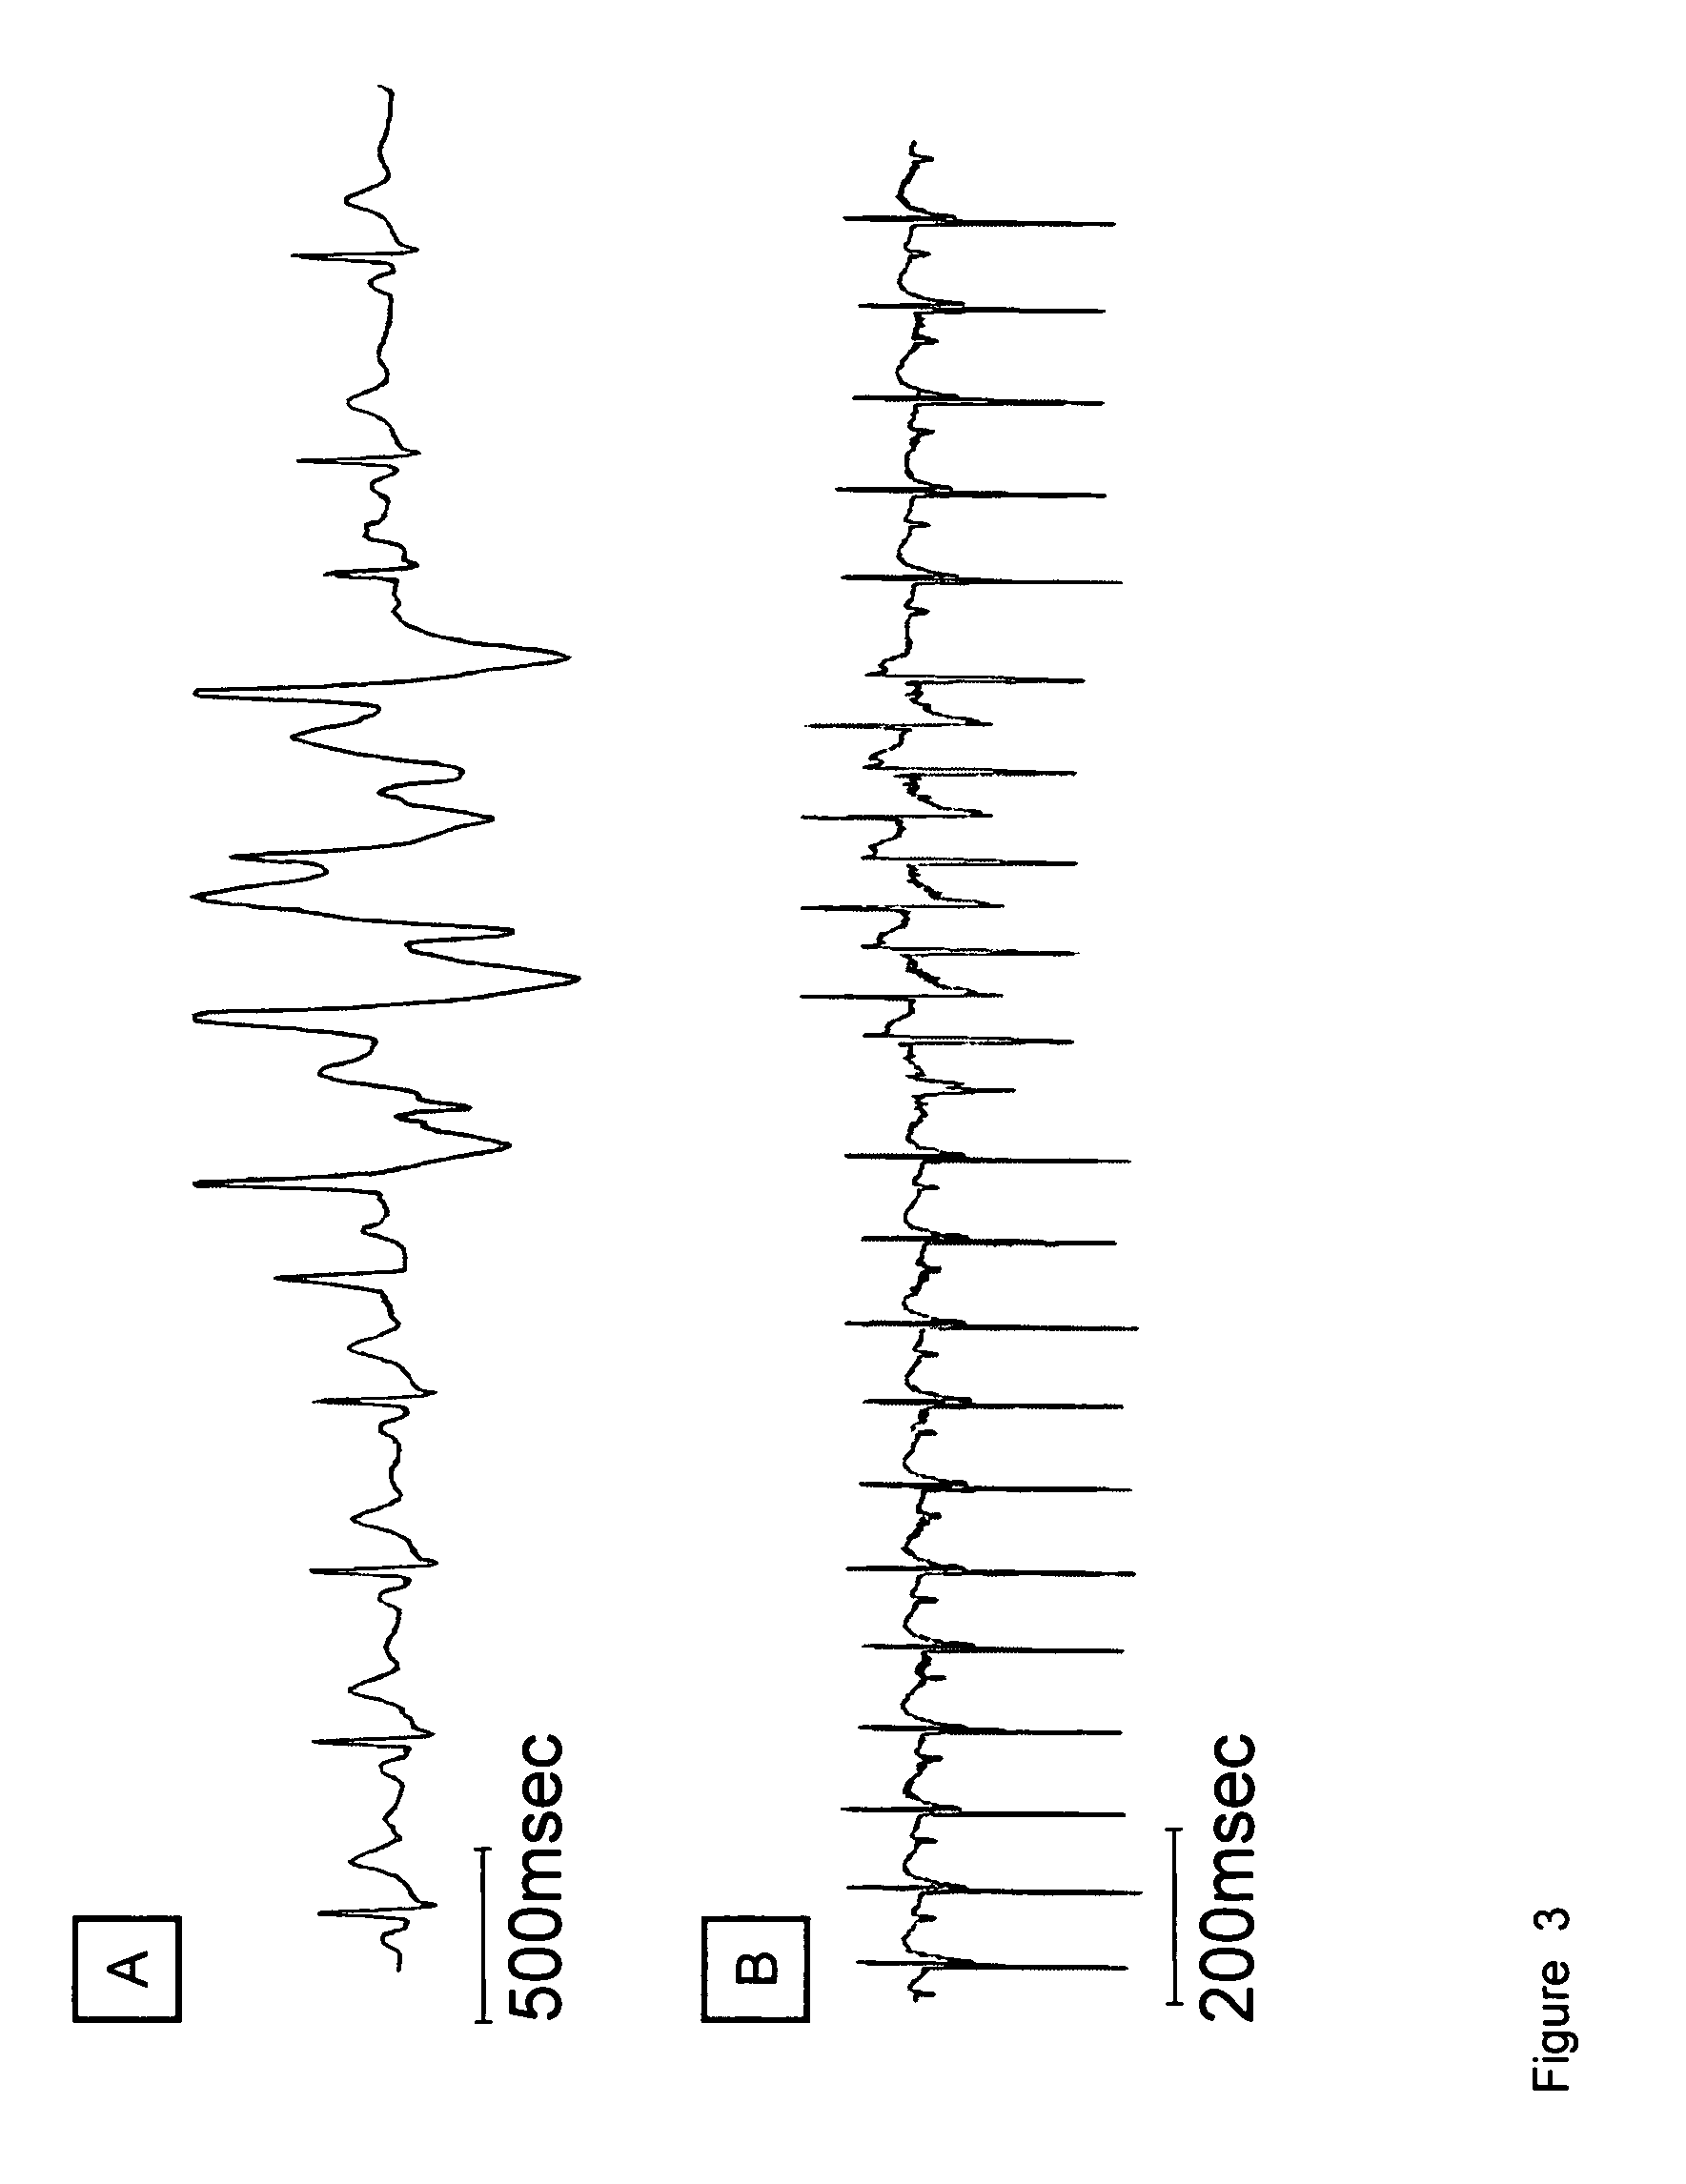 Transgenic animal model for catecholaminergic polymorphic ventricular tachycardia (CPVT) and use thereof